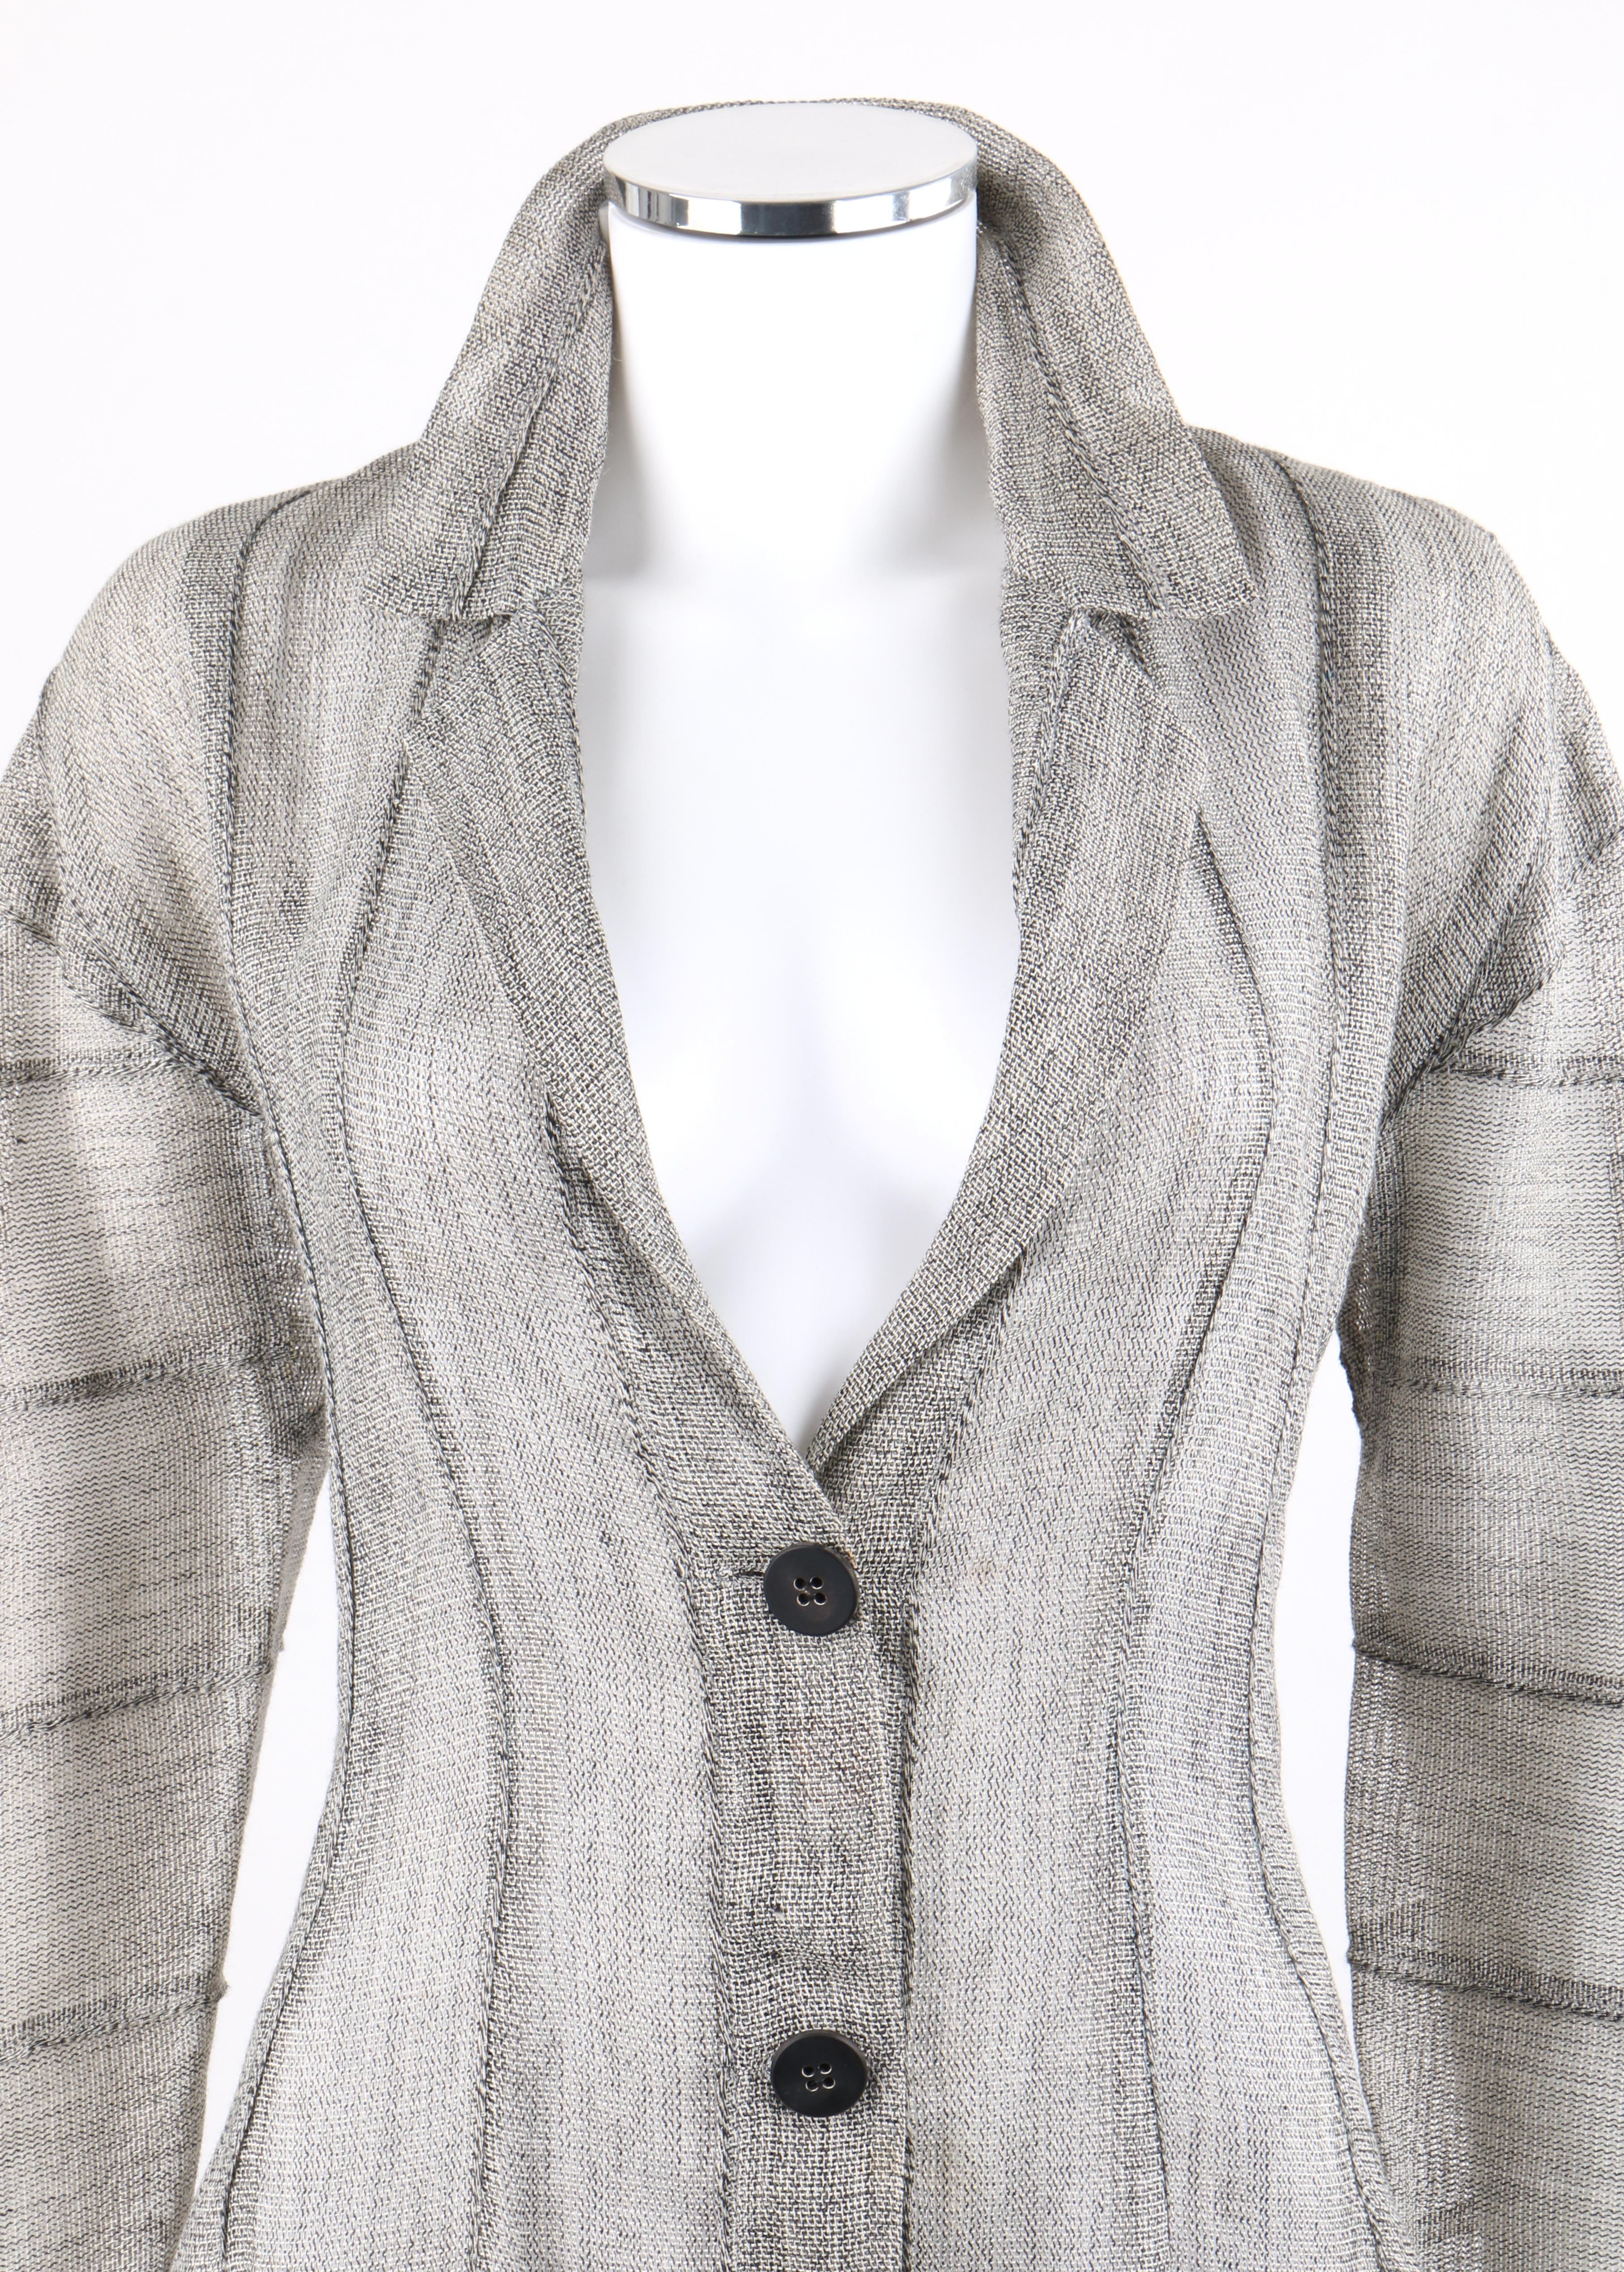 ISSEY MIYAKE c.1990 Heathered Gray Linen Flared Cutout Hem Sheer Knit Blazer Top

Circa: 1990's
Designer: Issey Miyake
Style: Jacket top / blazer
Color(s): Shades of gray, black, white (exterior, interior)
Lined: No
Marked Fabric Content: “100%